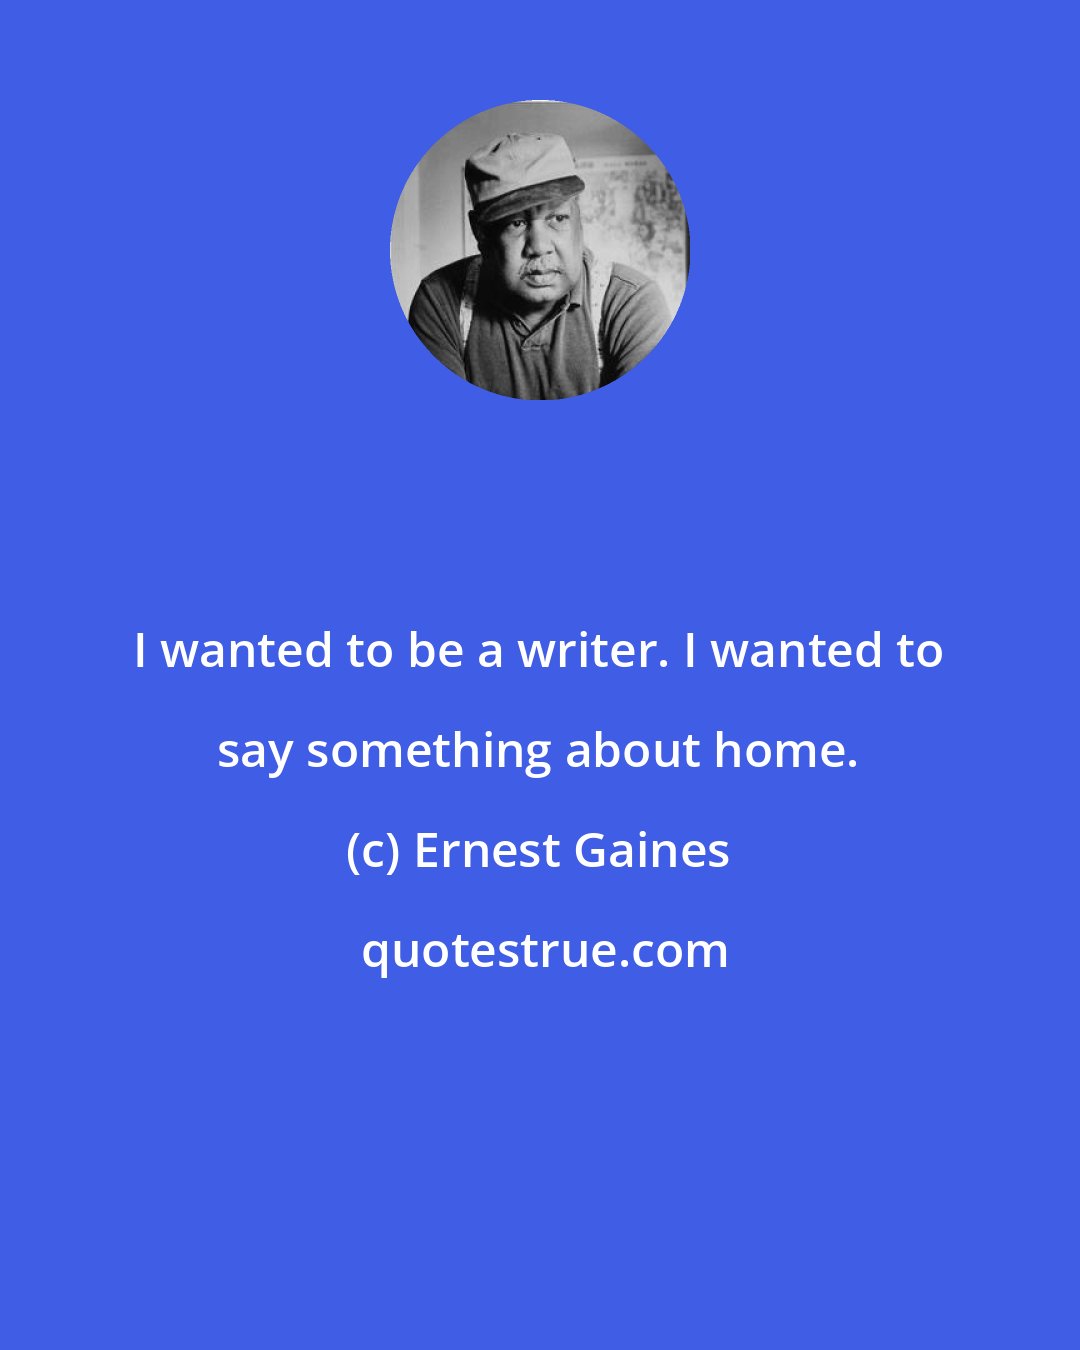 Ernest Gaines: I wanted to be a writer. I wanted to say something about home.